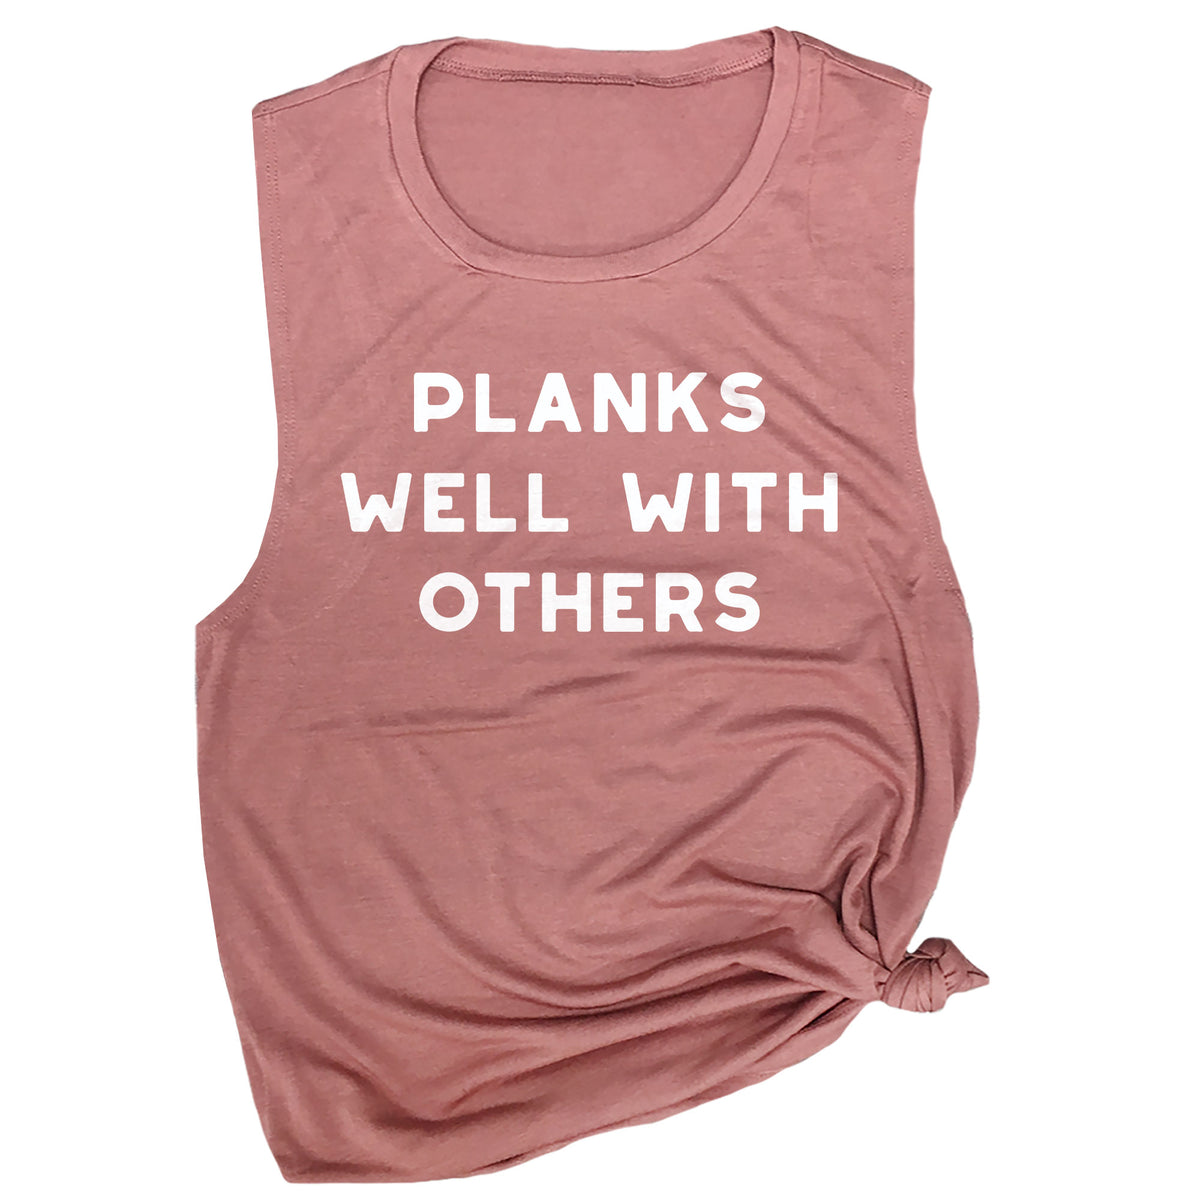 Planks Well with Others Muscle Tee